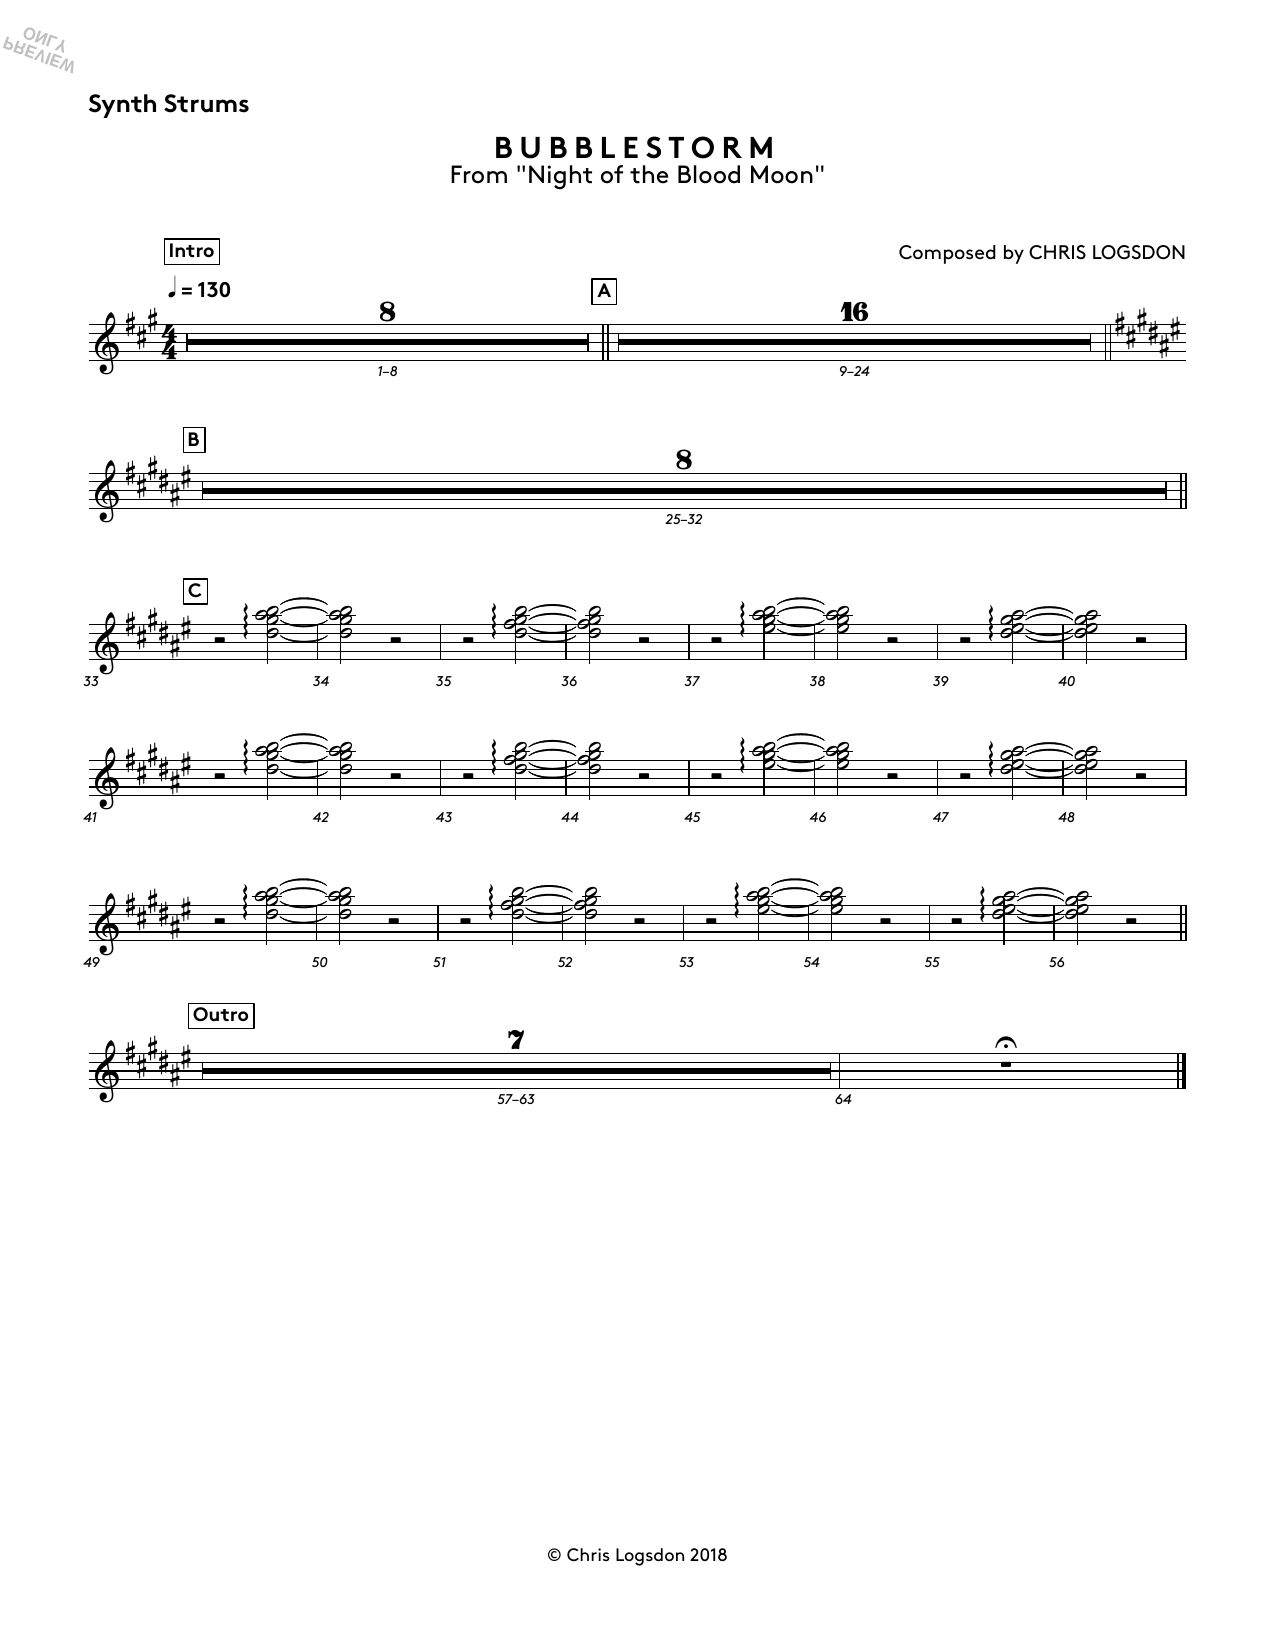 Chris Logsdon Bubblestorm (from Night of the Blood Moon) - Synth Strums sheet music preview music notes and score for Performance Ensemble including 1 page(s)